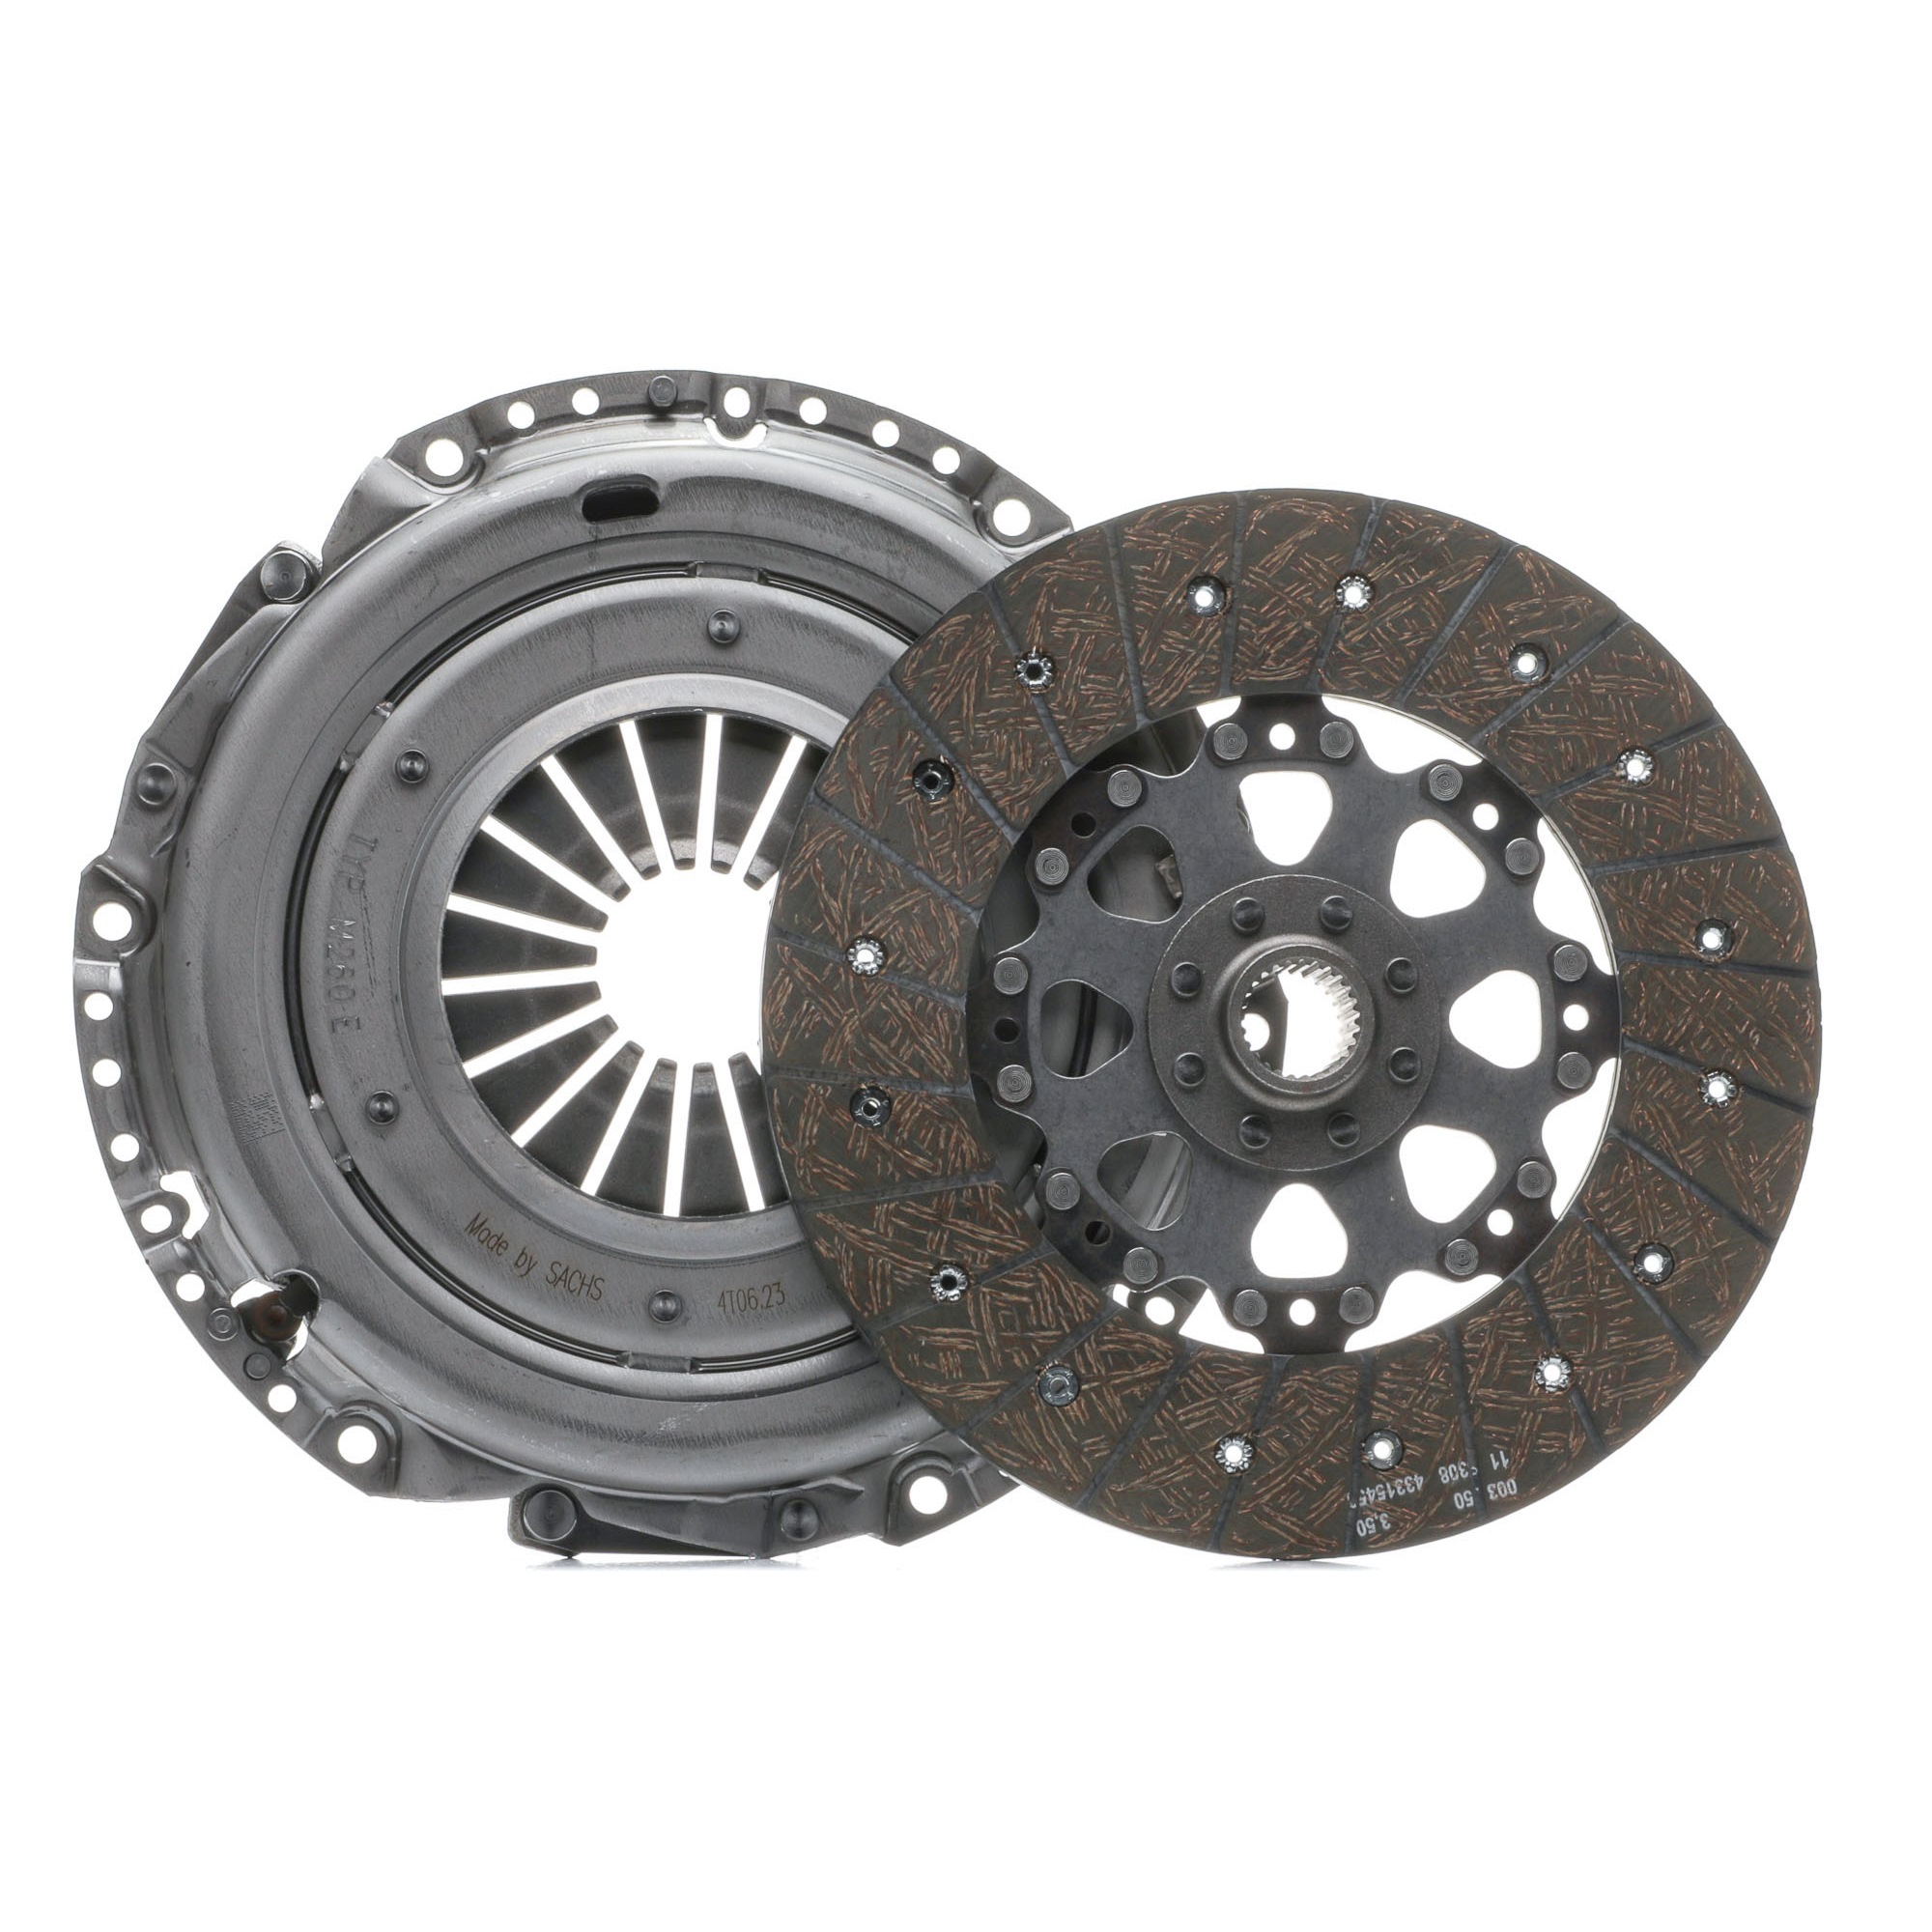 SACHS Clutch replacement kit Mercedes W166 new 3000 970 142